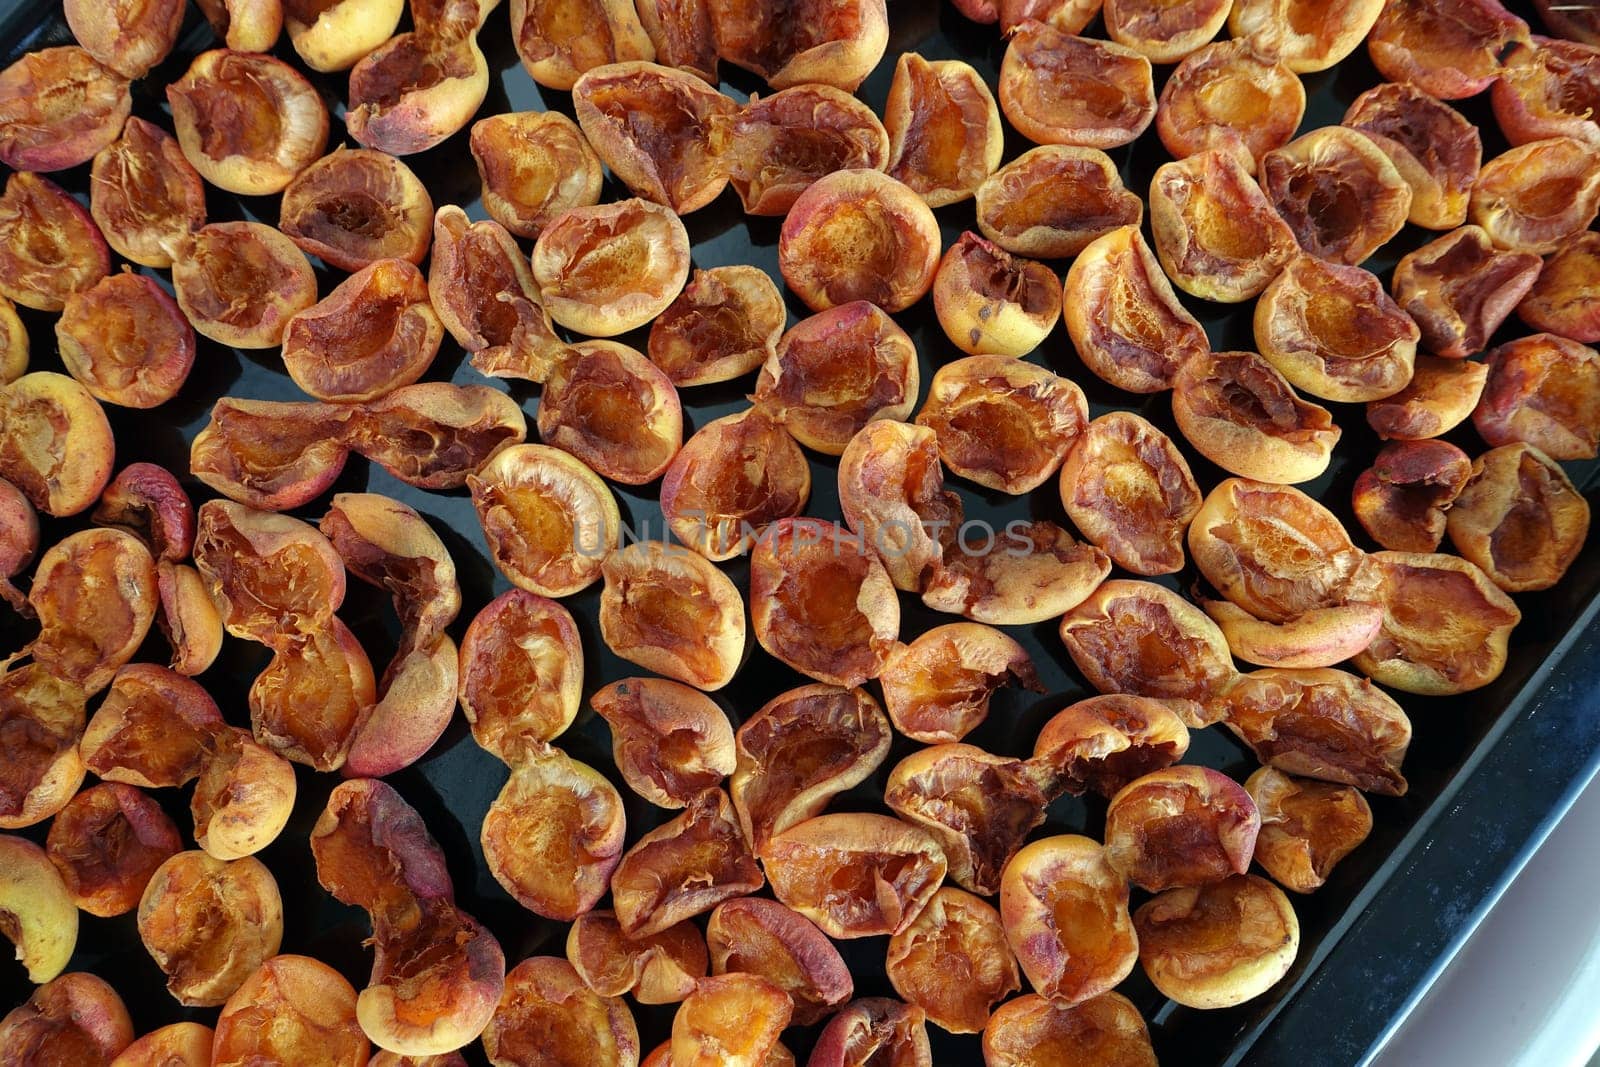 homemade apricot drying process, fruit drying process in summer, drying fruit in the sun, by nhatipoglu